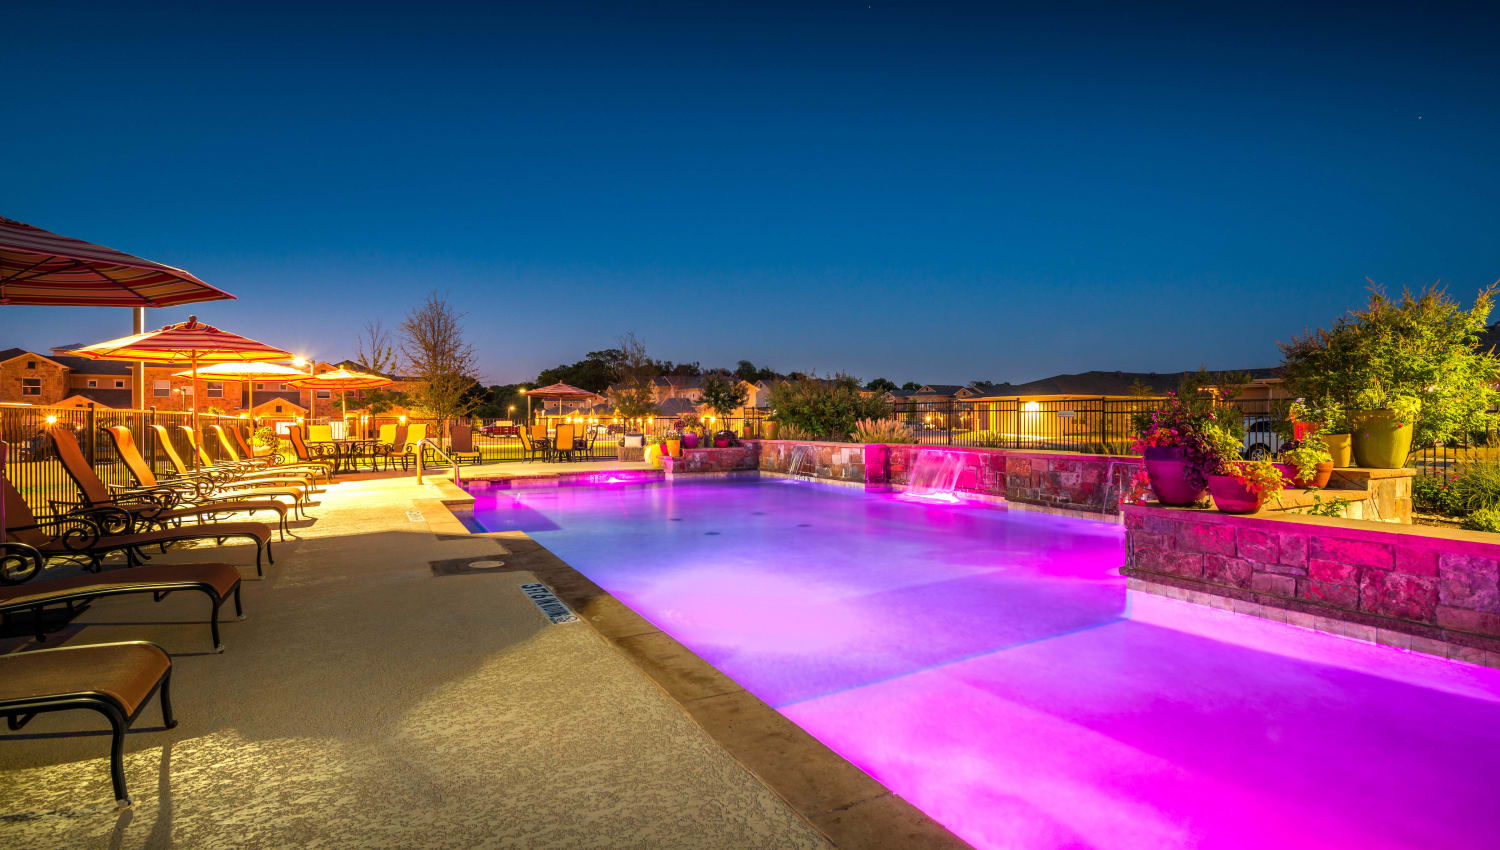 Colorful lighting at the swimming pool area at dusk at Olympus Willow Park in Willow Park, Texas